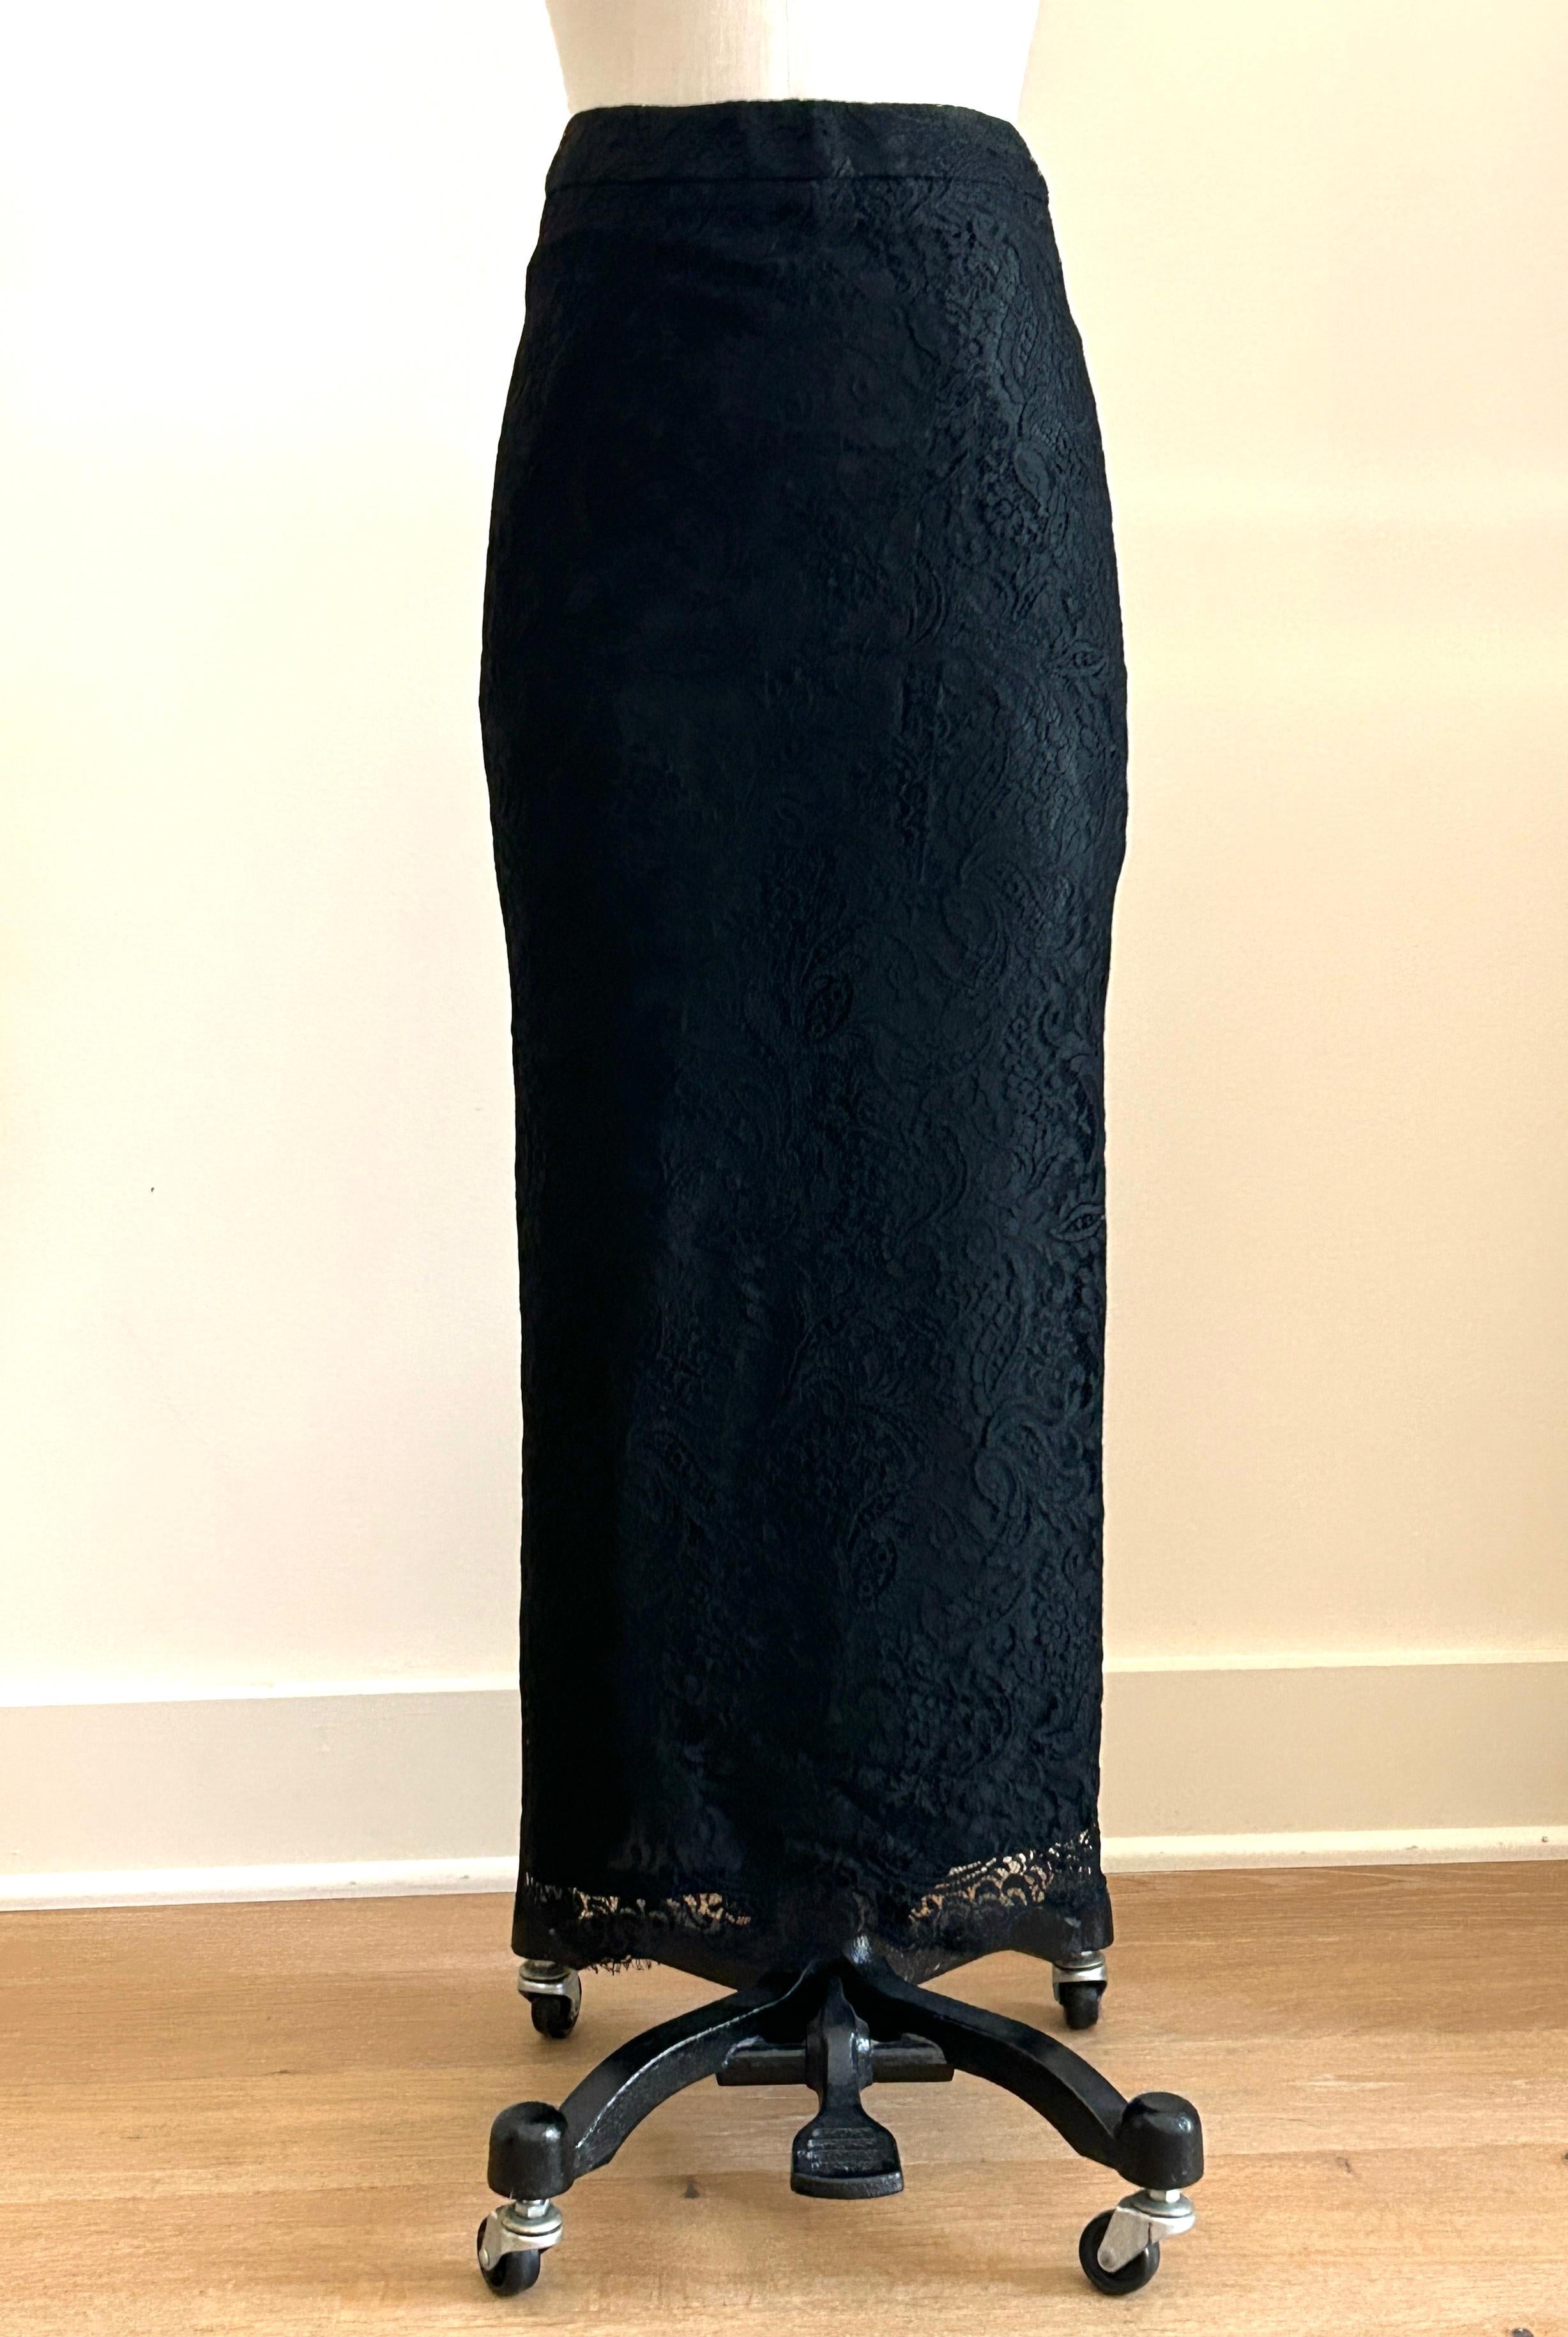 Alexander McQueen black floral lace long skirt with slightest train in the back, circa 1990s or early 2000s. Amazingly fitted with scalloped hem. Back zip and button closure. 

Will fit between midi to maxi style depending on wearer's height. 

100%